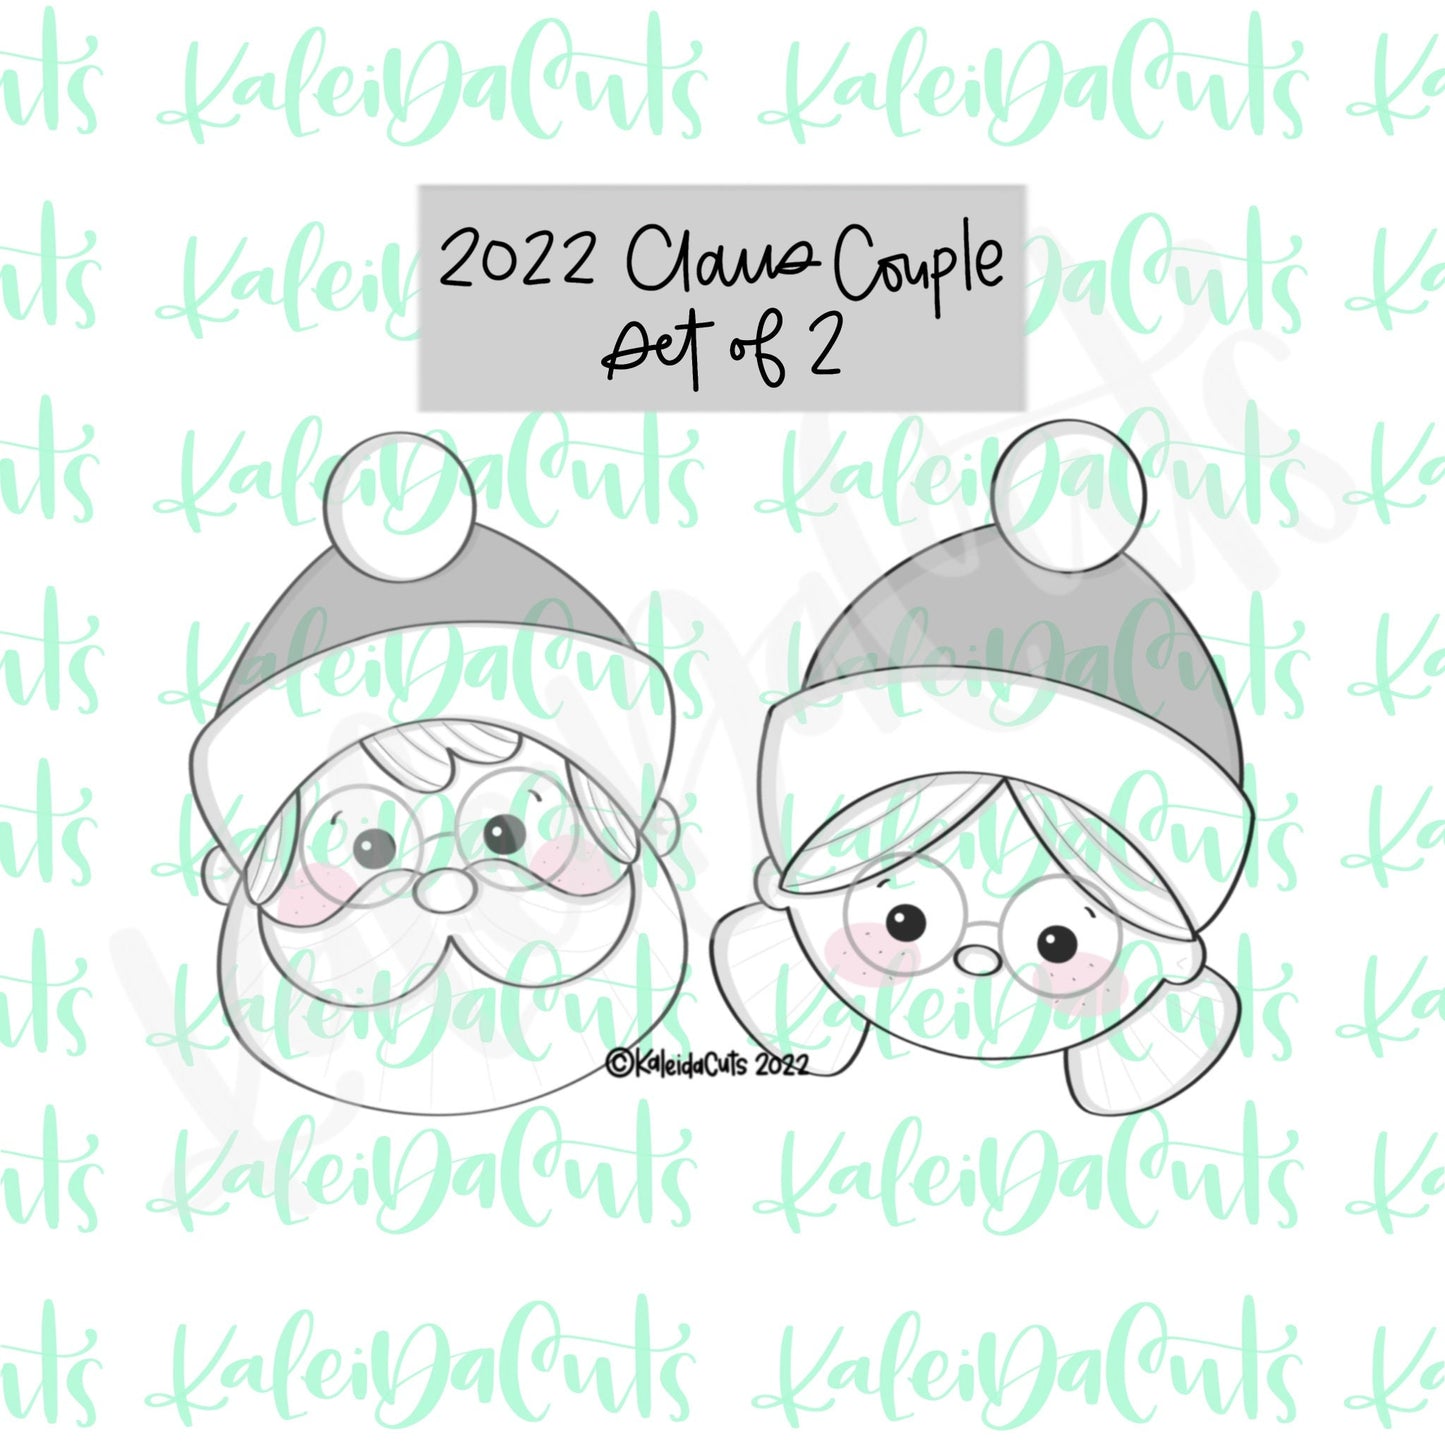 2022 Claus Couple Set of 2 Cookie Cutters